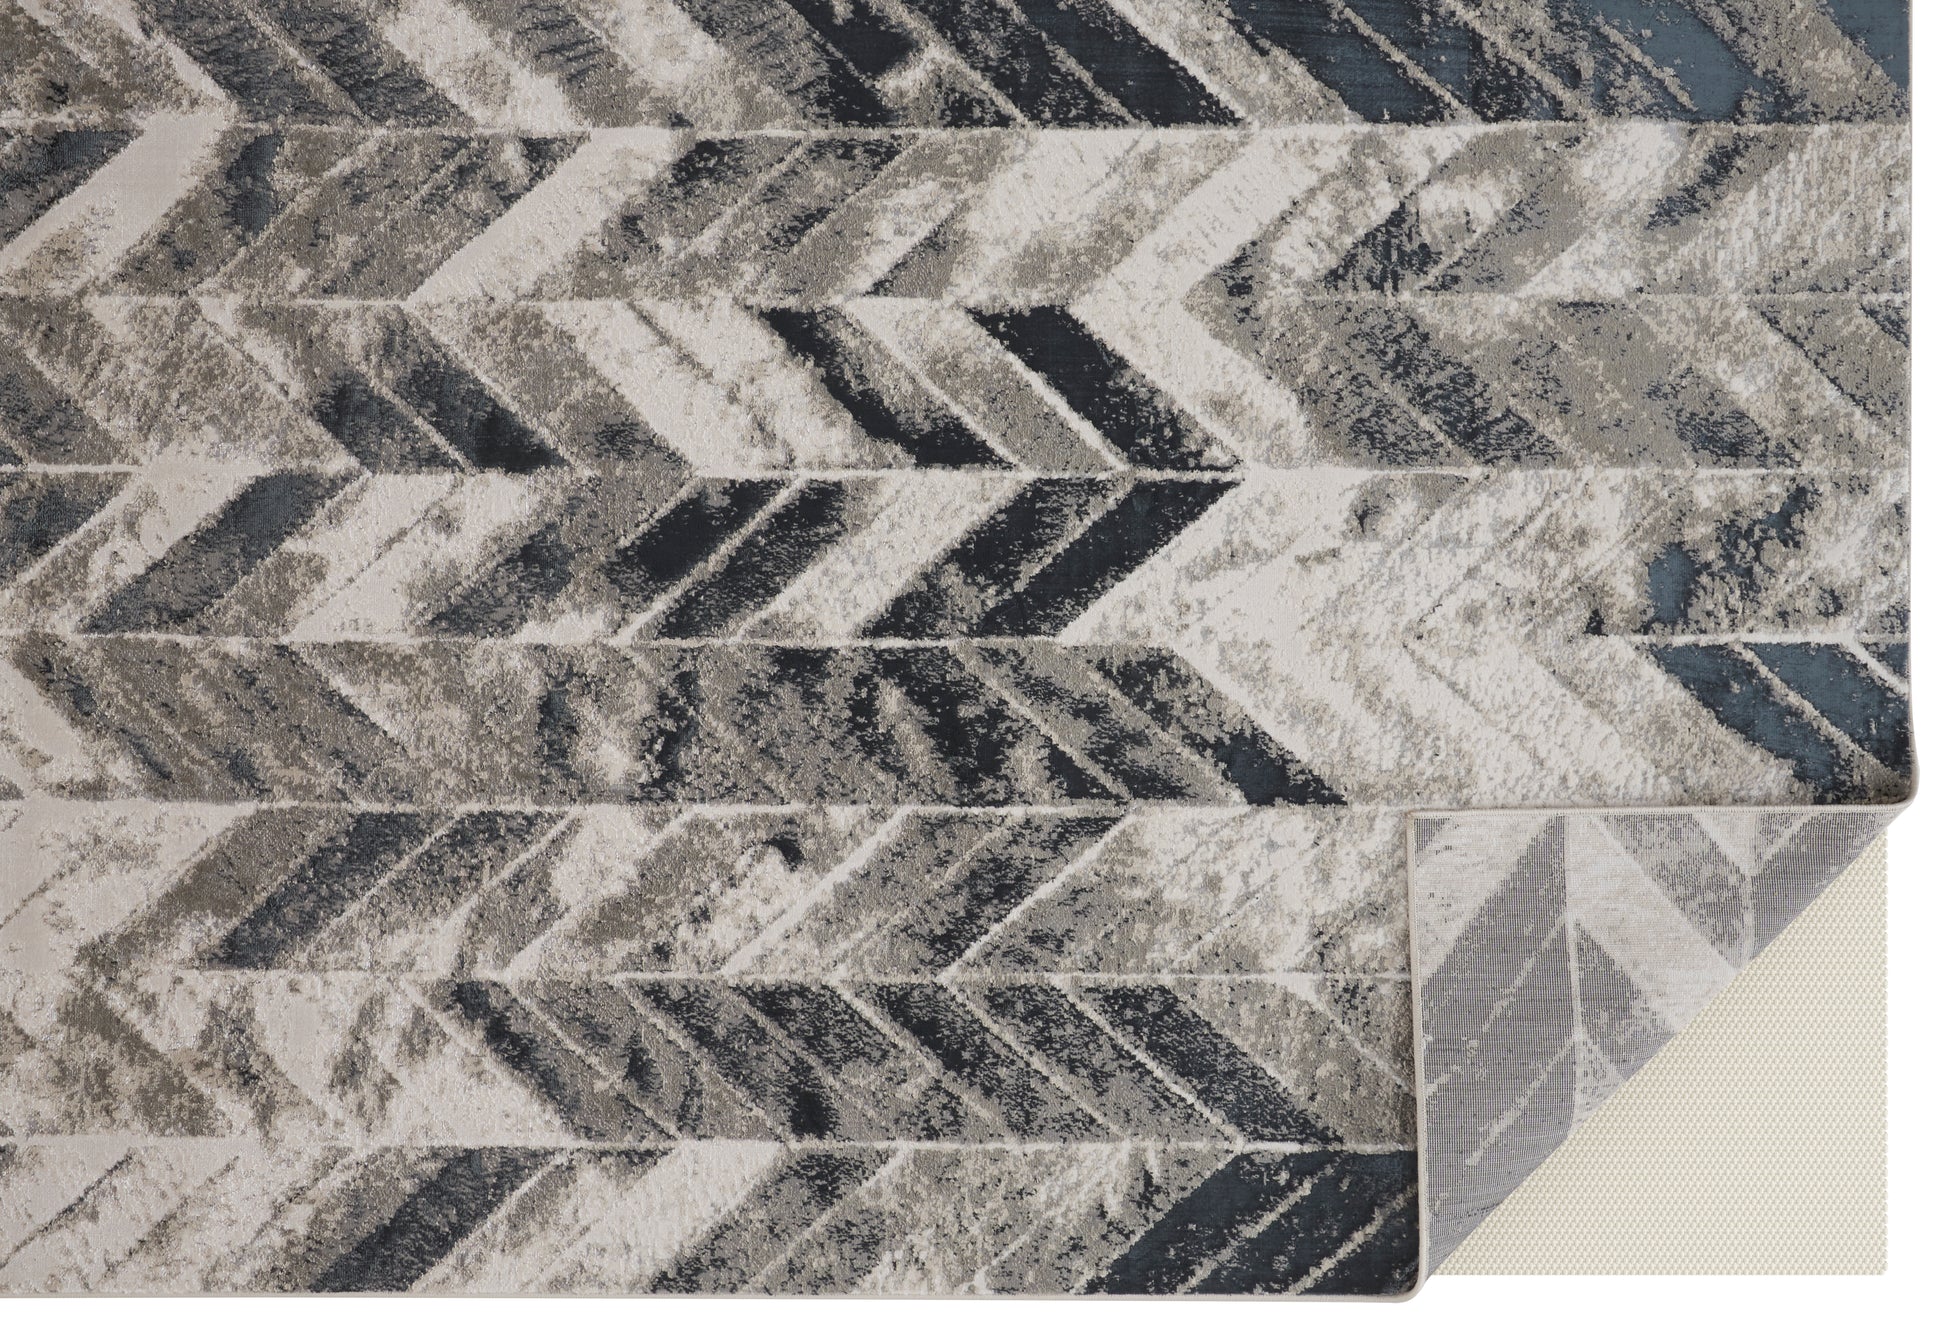 Feizy Micah 3048F Gray Modern/Industrial Machine Woven Rug